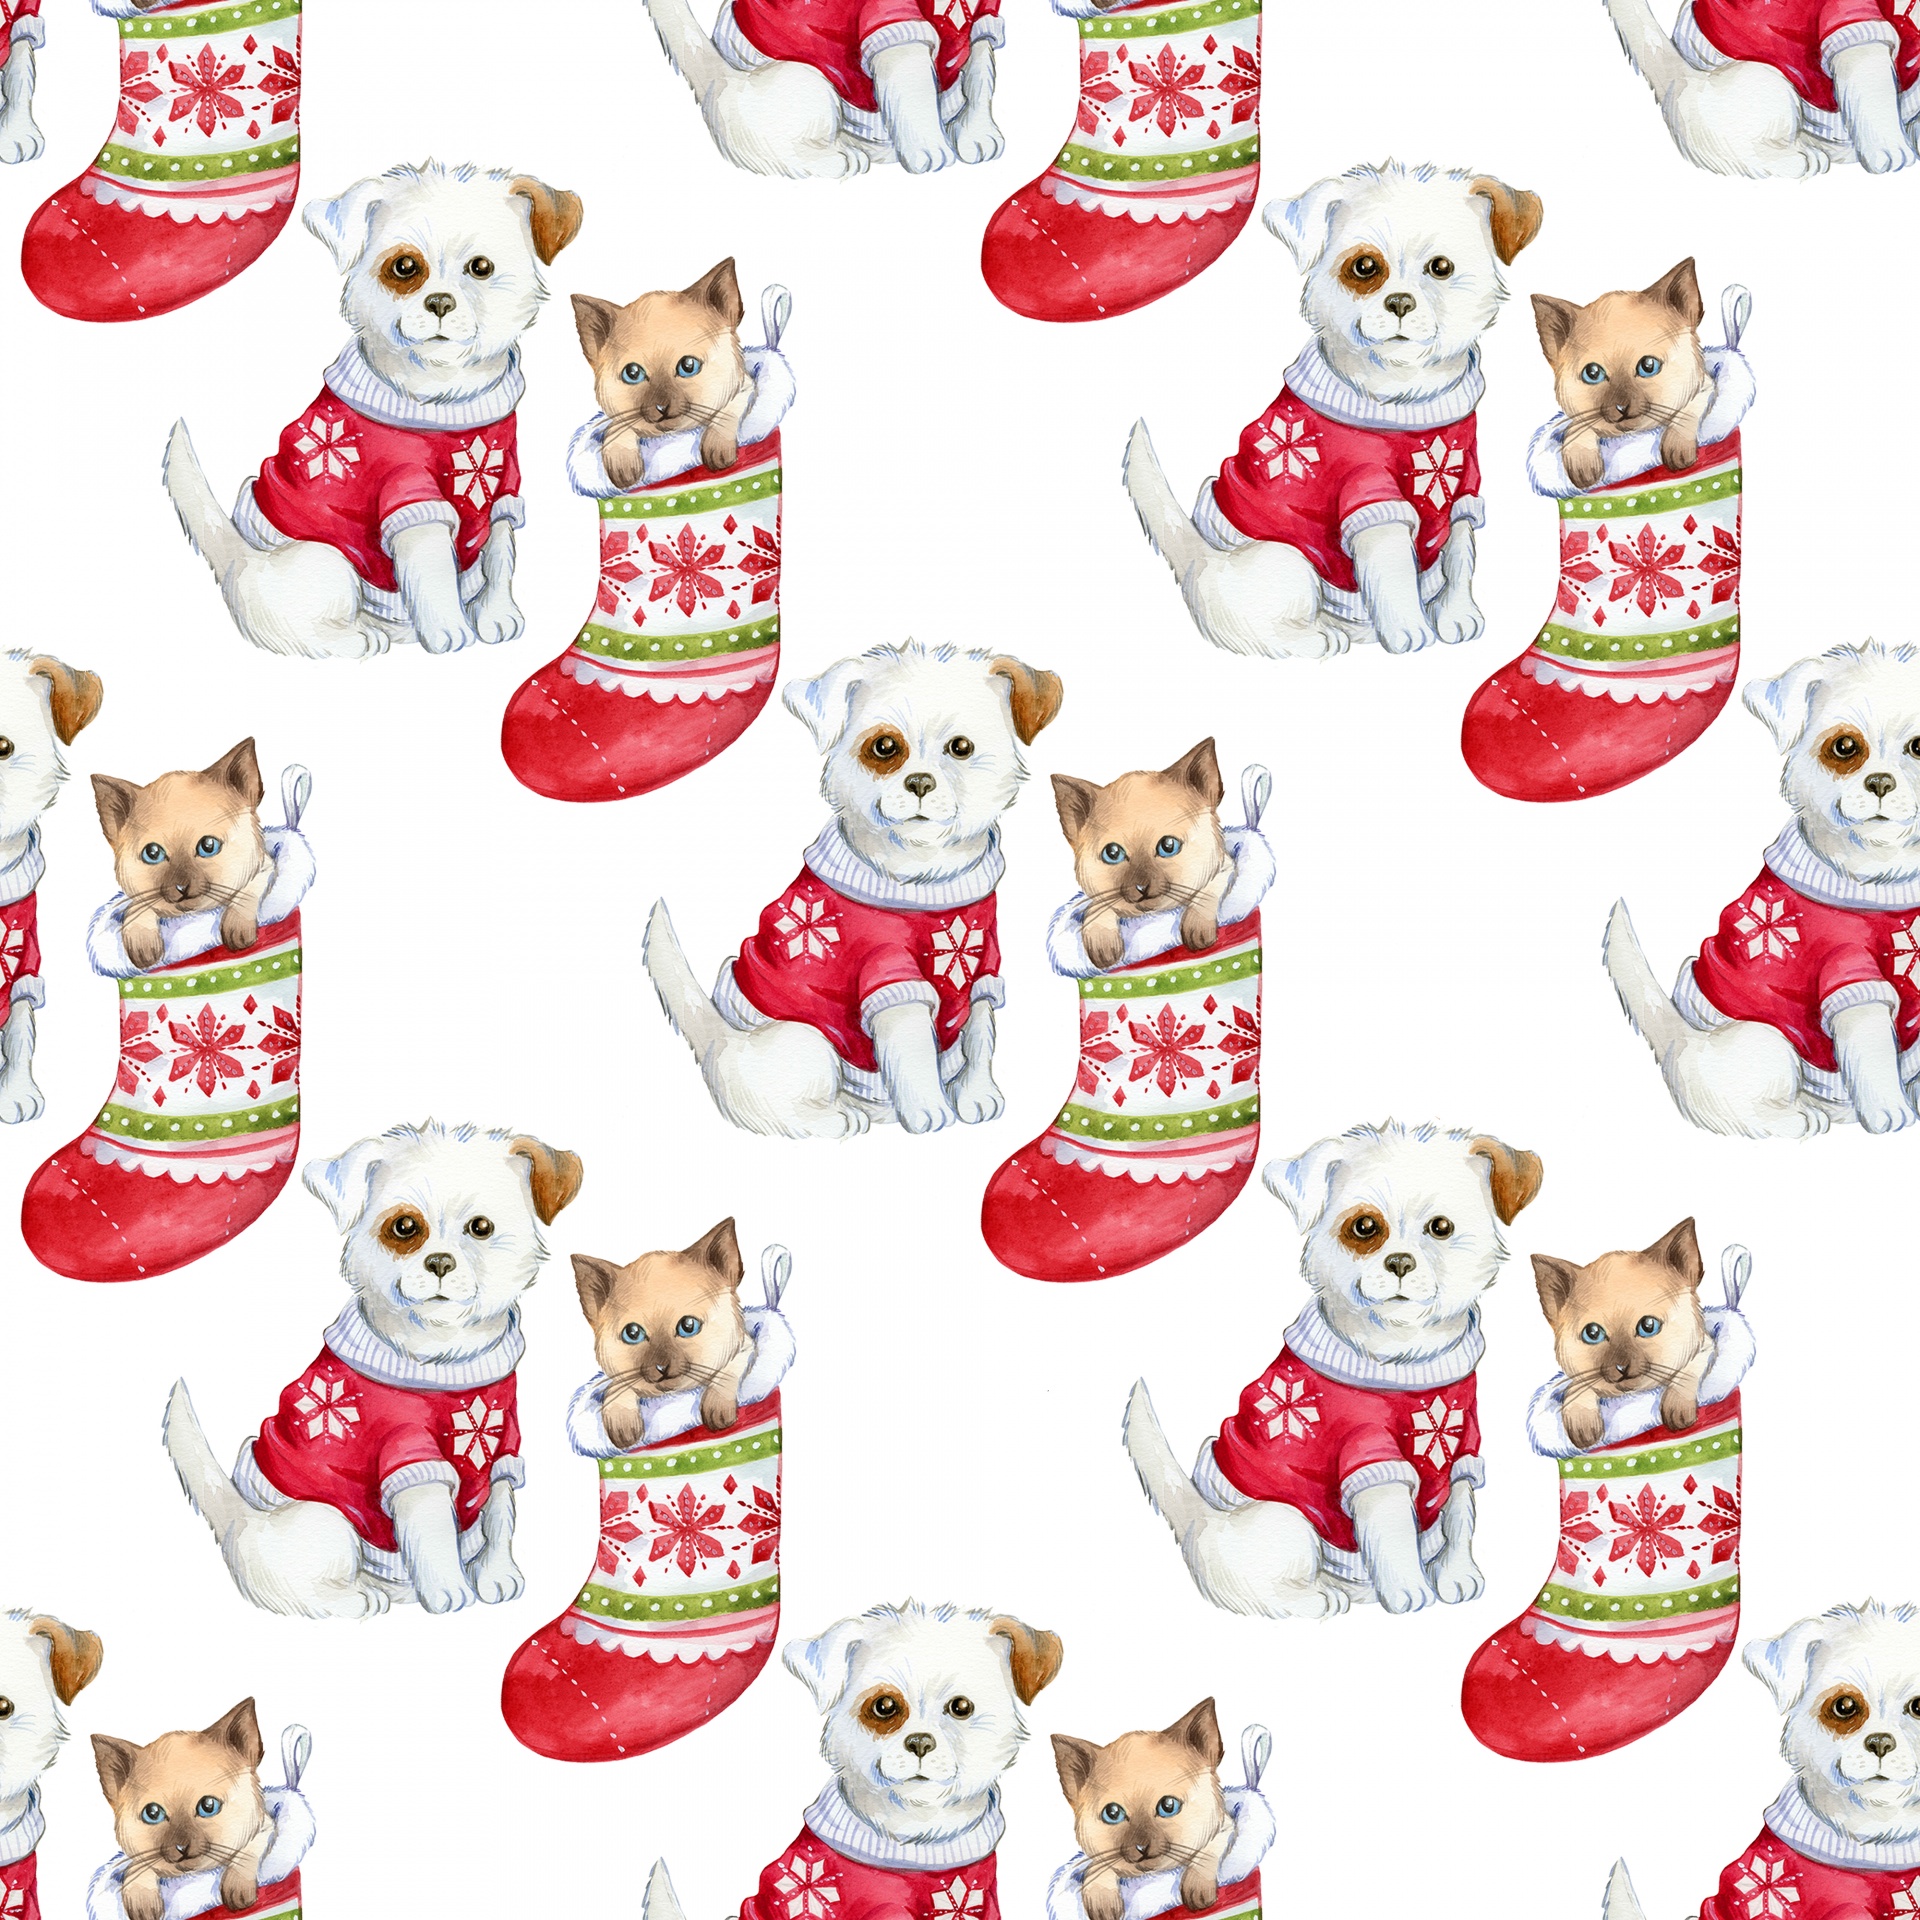 Cute illustration of puppy and kitten christmas wallpaper background